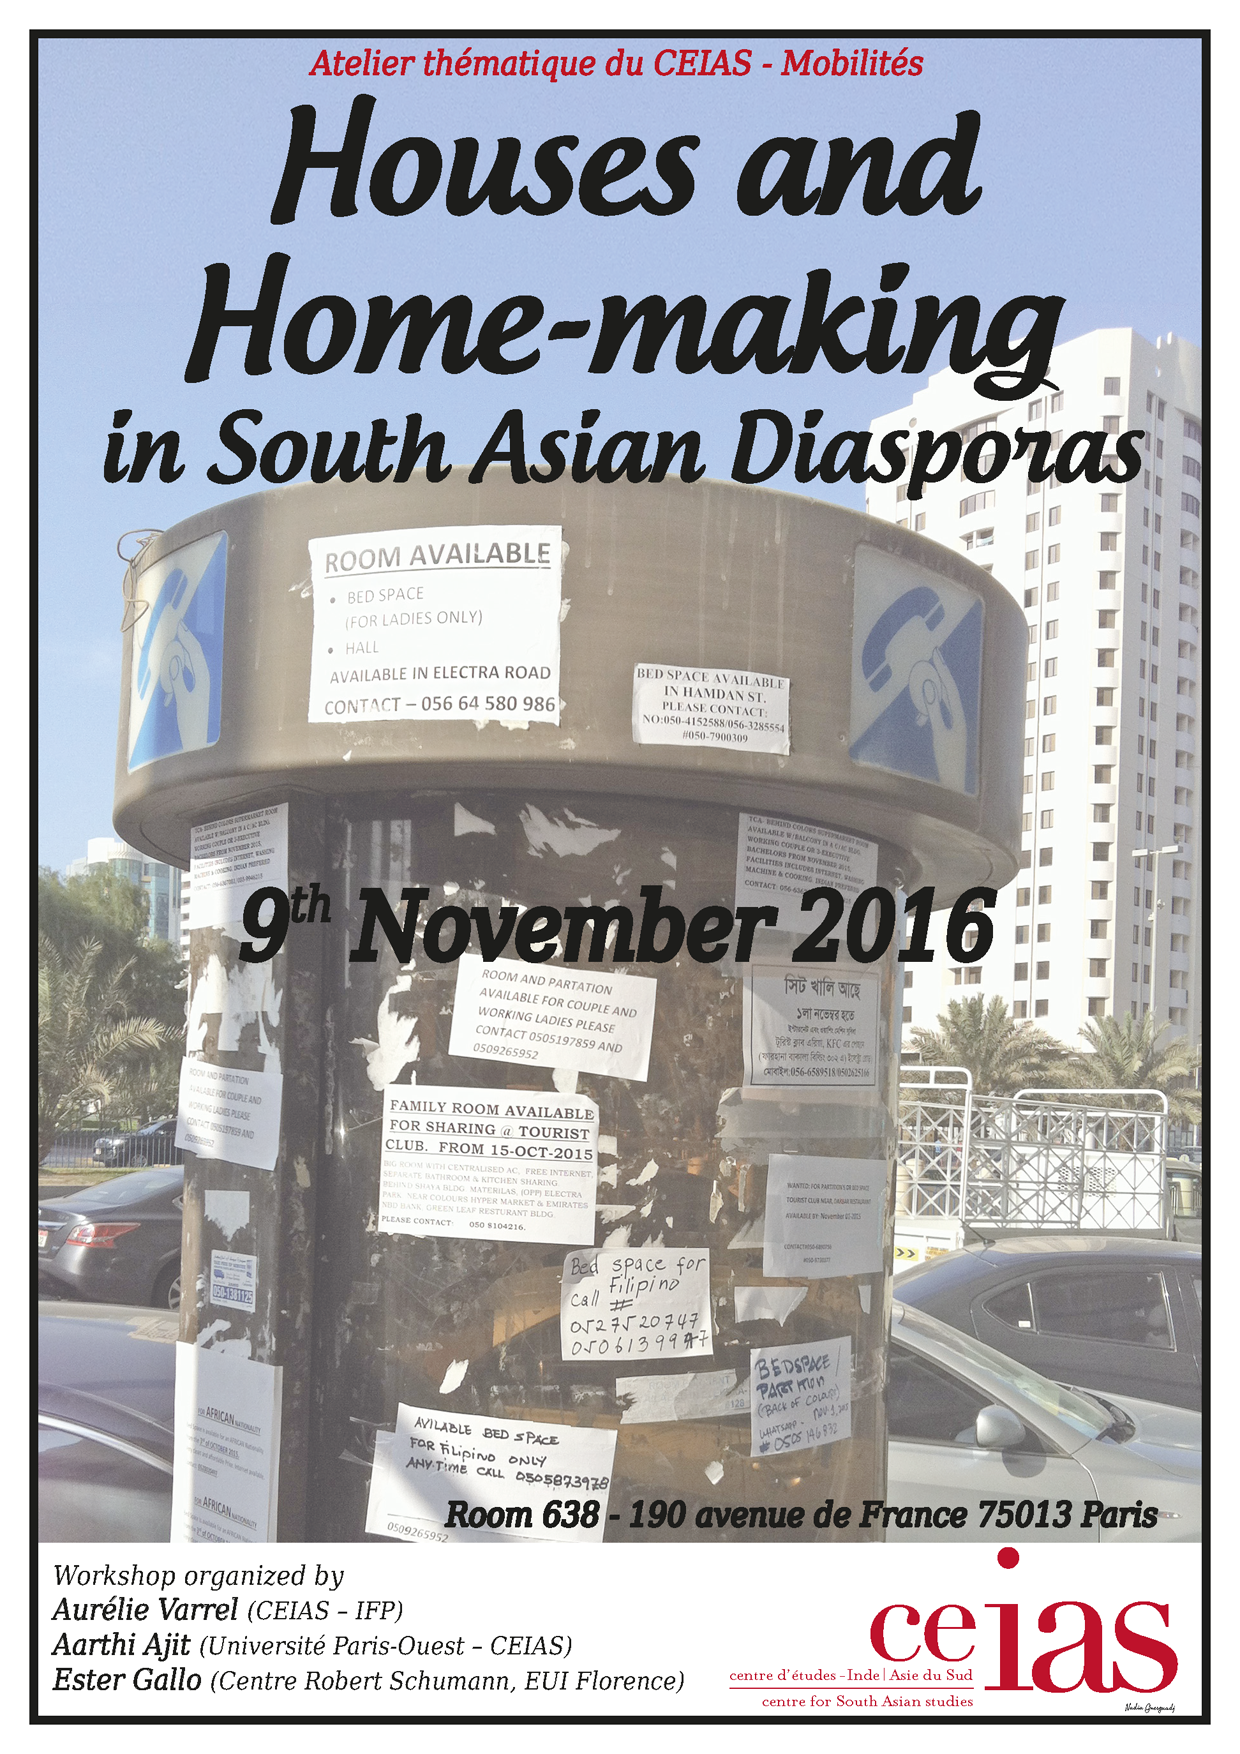 Houses and Home-making in South Asian Diasporas